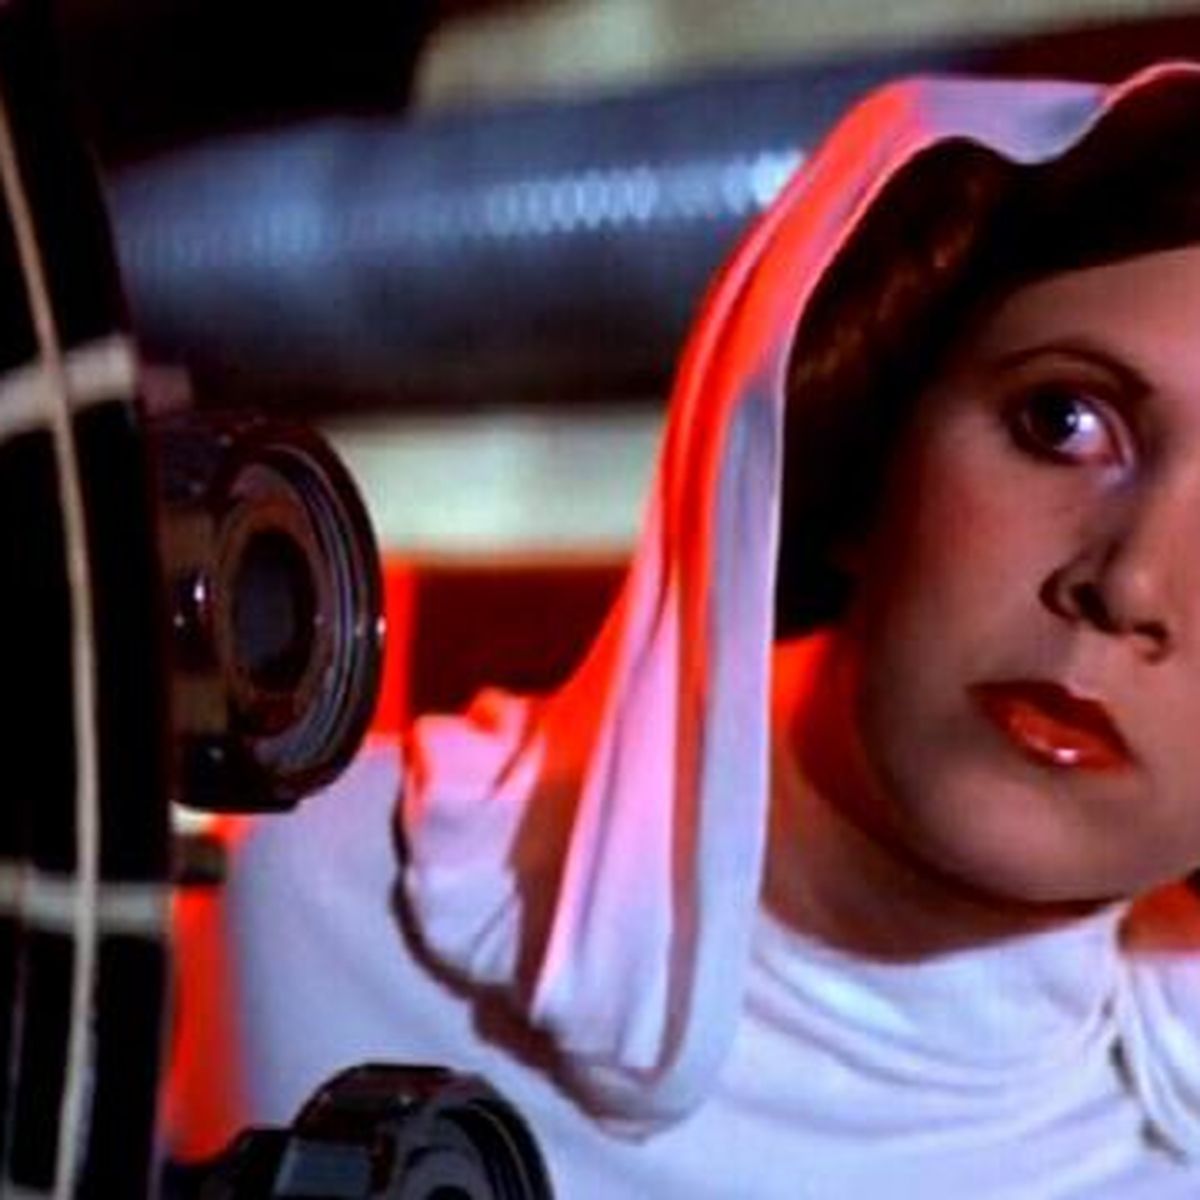 You get strangled by your bra: George Lucas Did Not Want Carrie Fisher to  Wear Underwear in Star Wars Movies